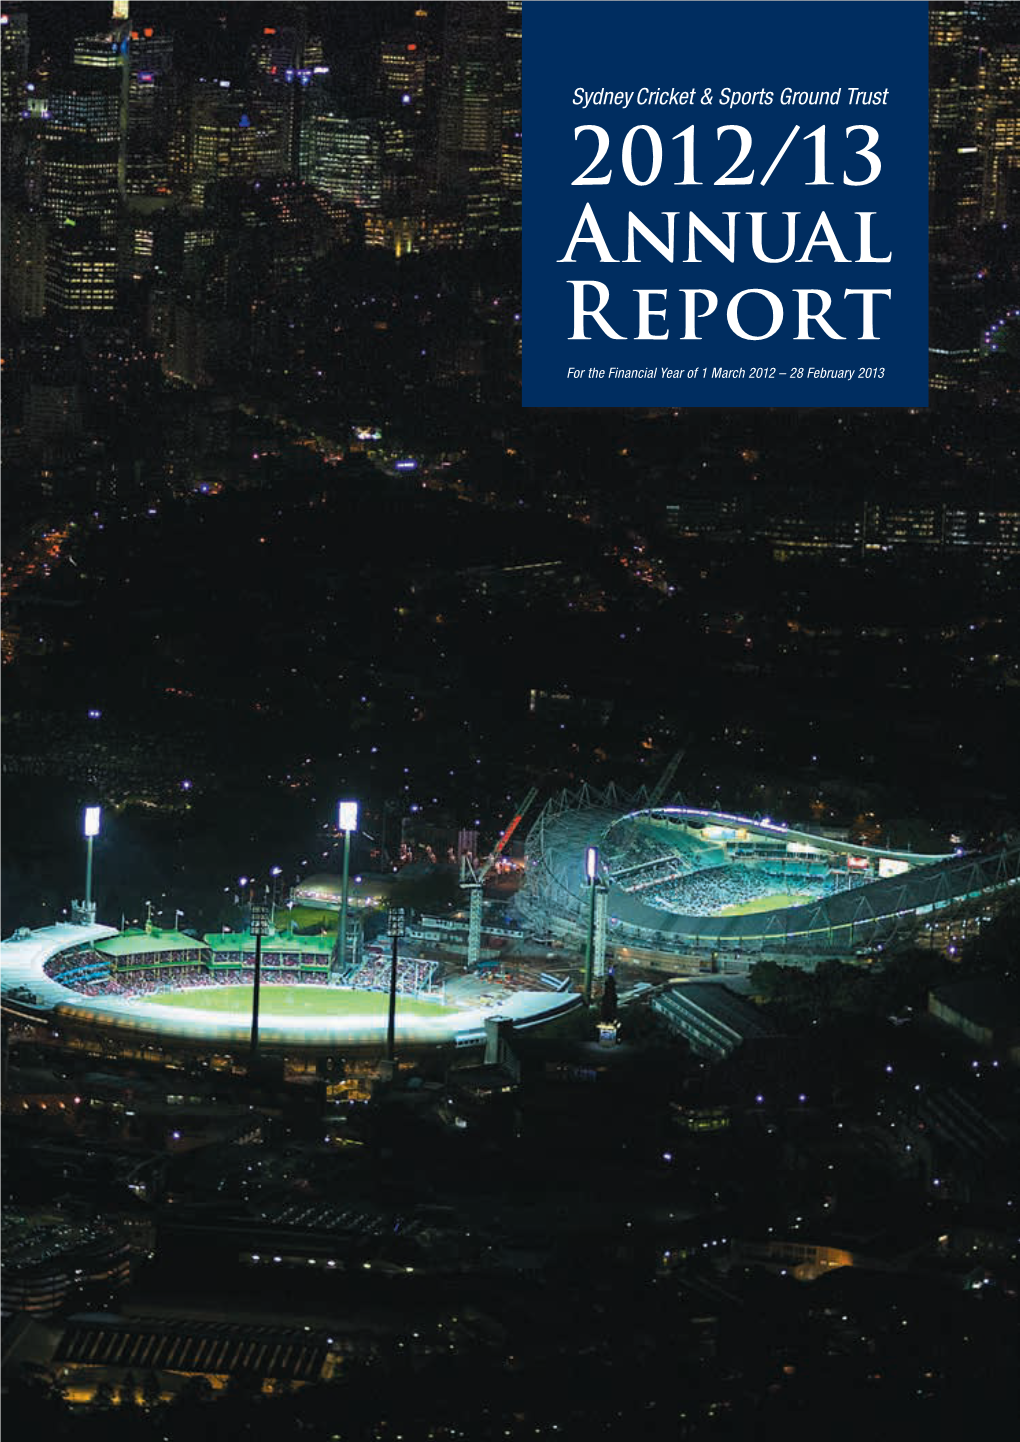 2012/13 Annual Report for the Financial Year of 1 March 2012 – 28 February 2013 Contents